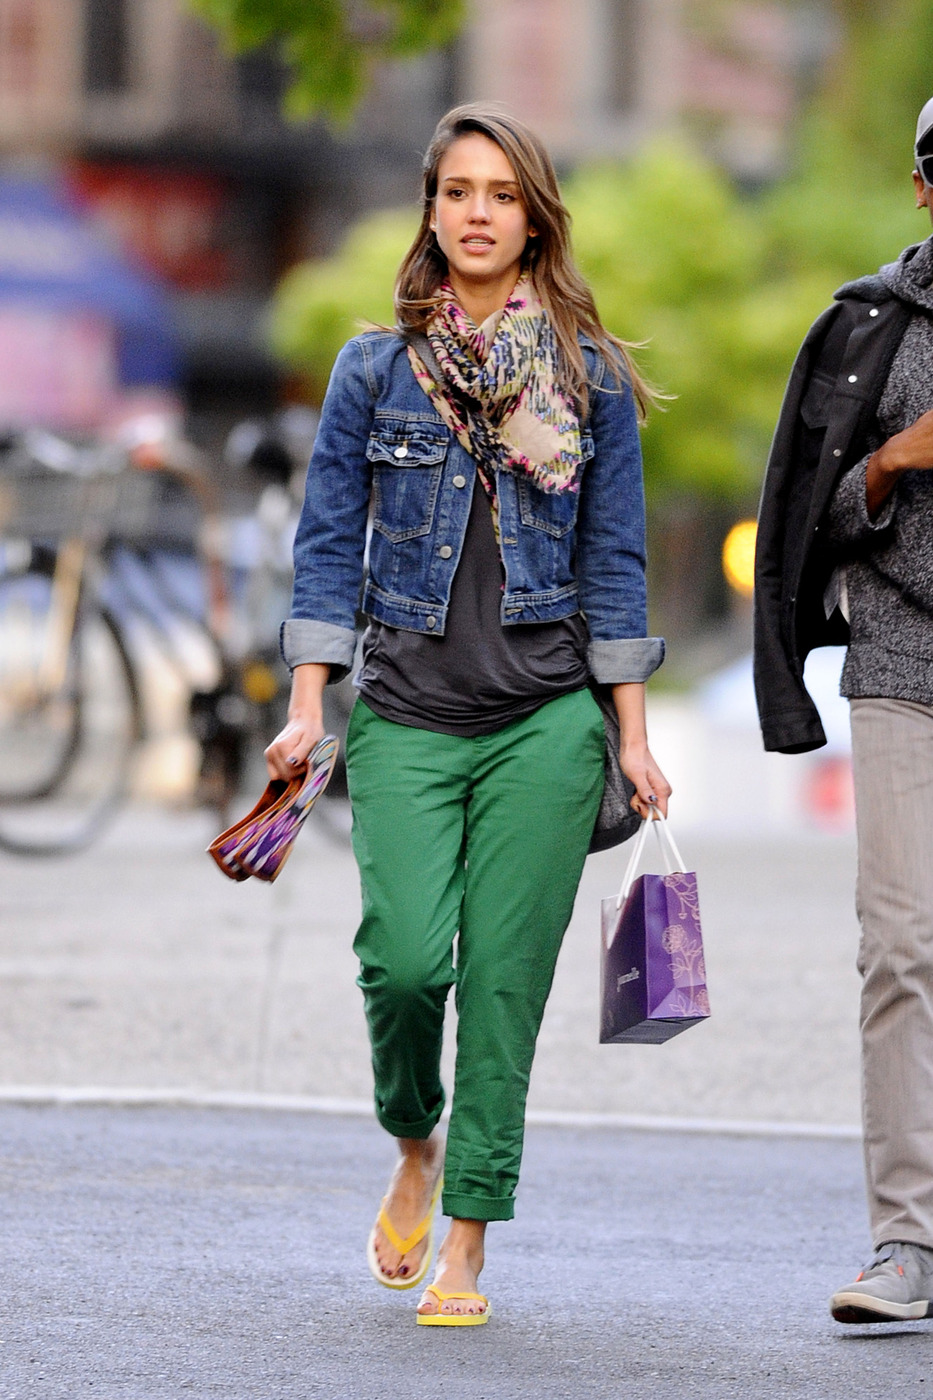 Jessica Alba does some shopping with a friend in New York City